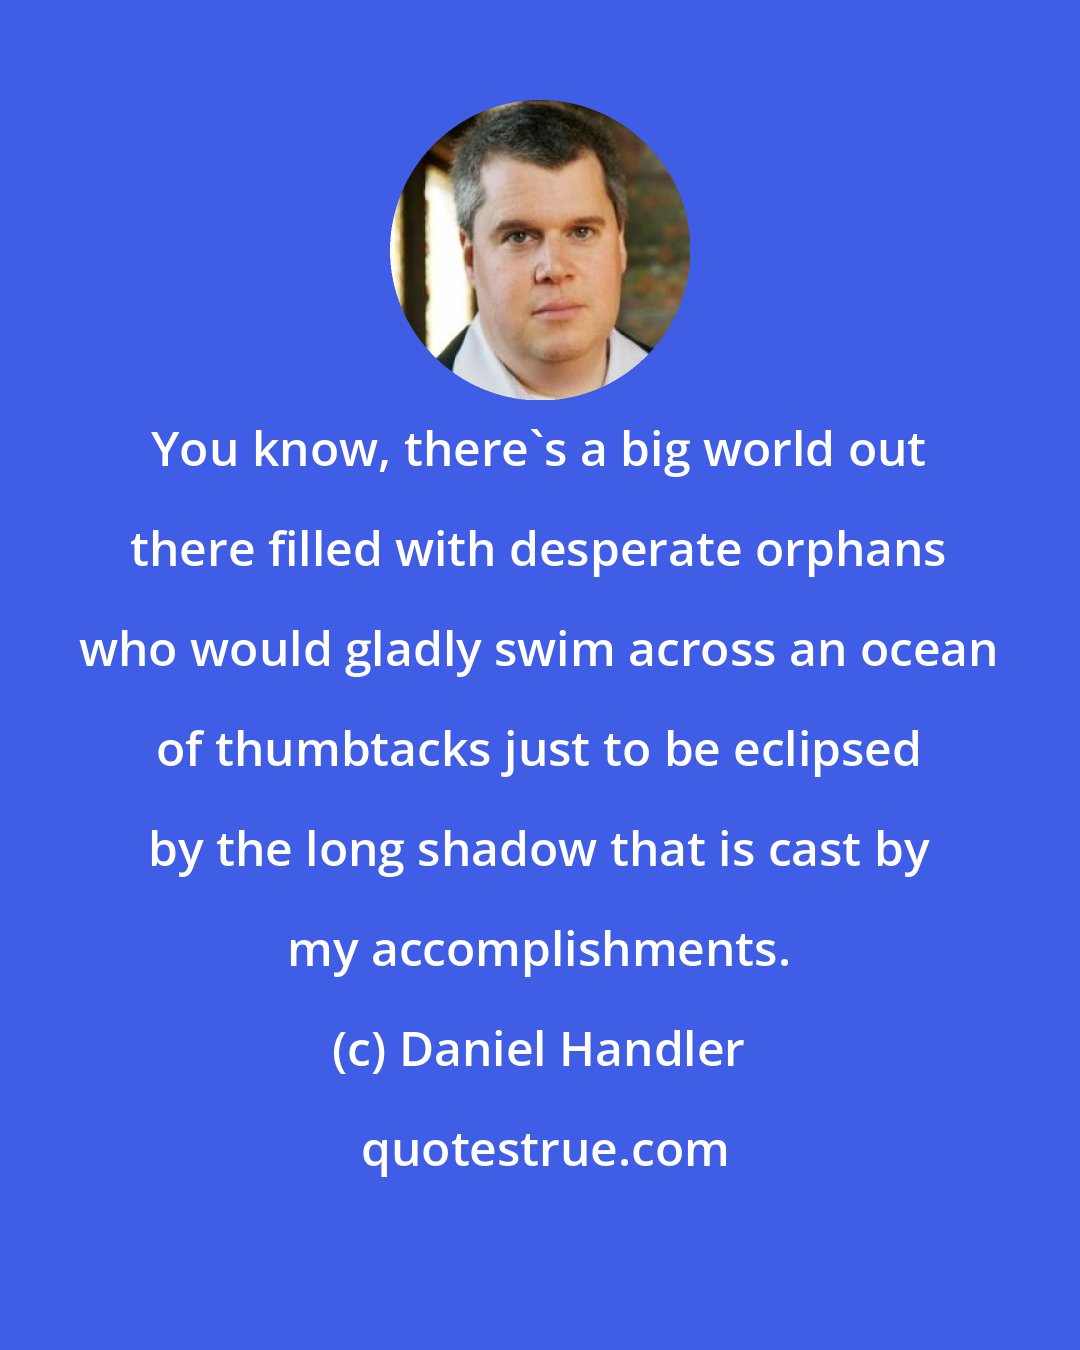 Daniel Handler: You know, there's a big world out there filled with desperate orphans who would gladly swim across an ocean of thumbtacks just to be eclipsed by the long shadow that is cast by my accomplishments.